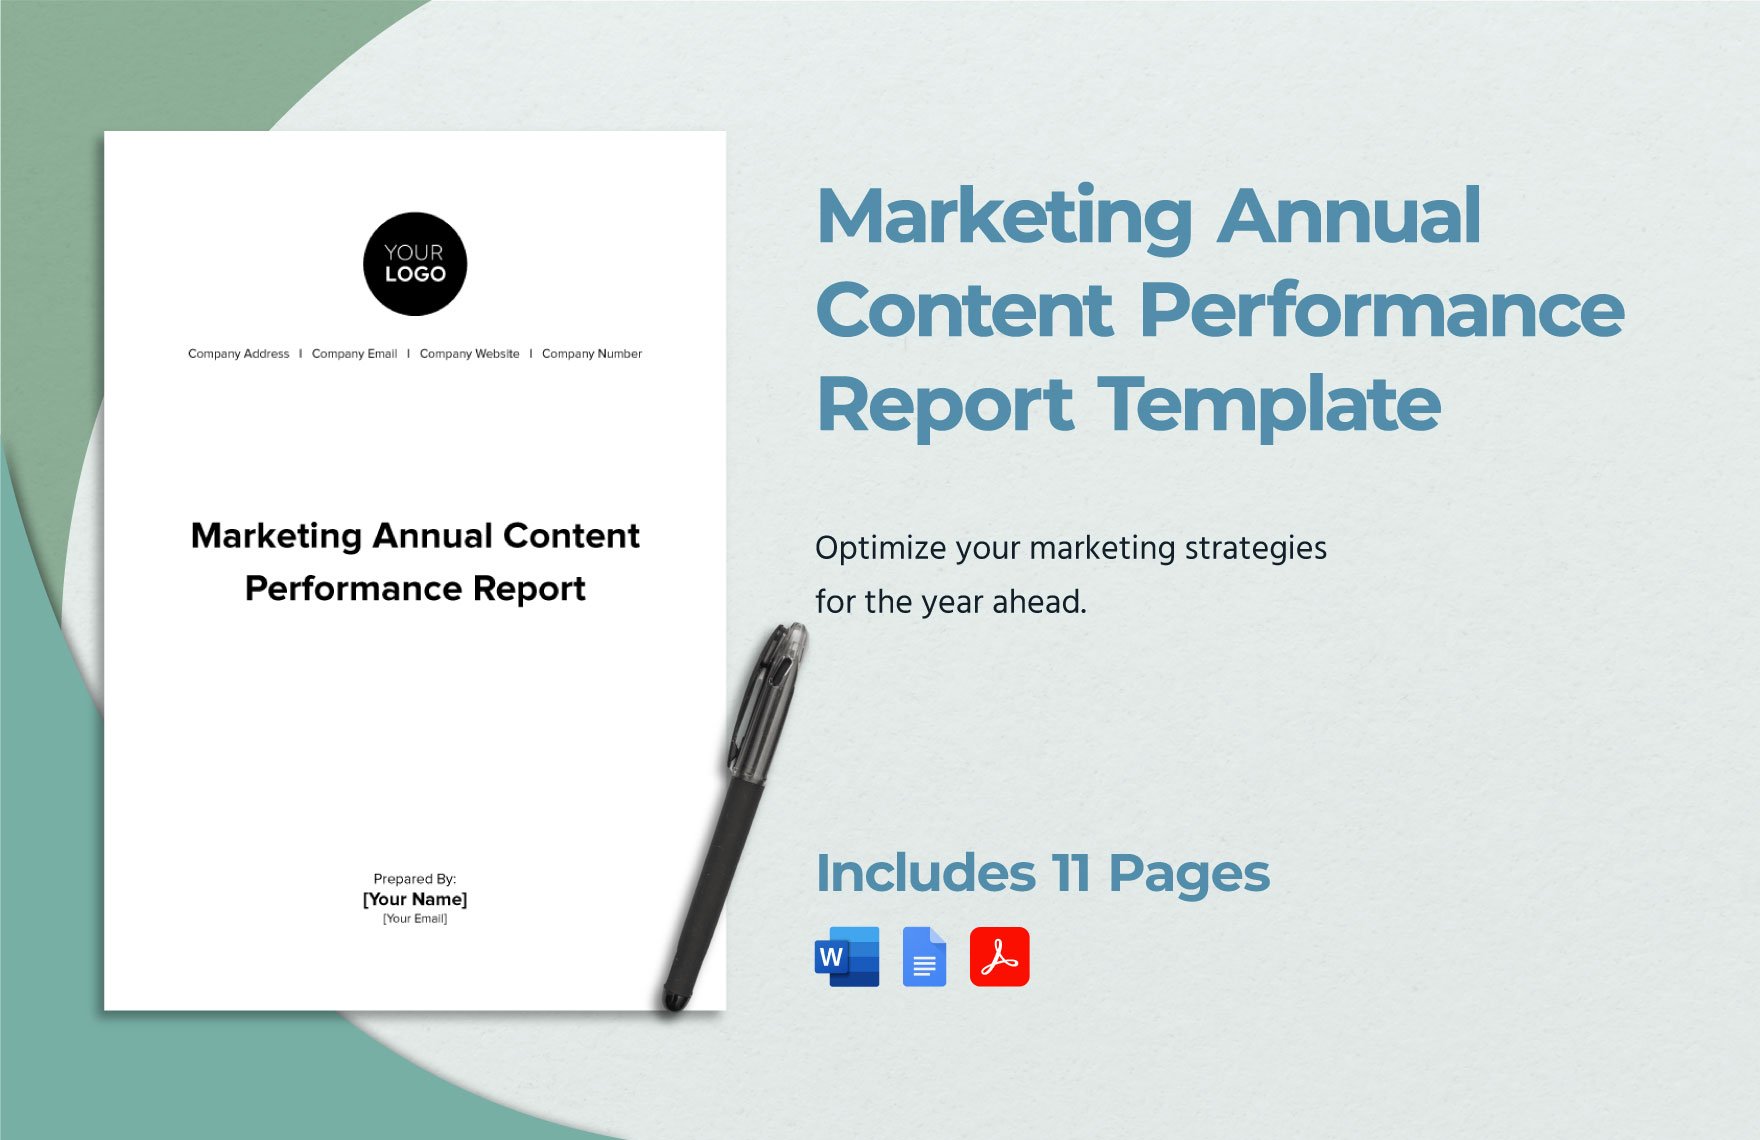 Marketing Annual Content Performance Report Template in Word, Google Docs, PDF